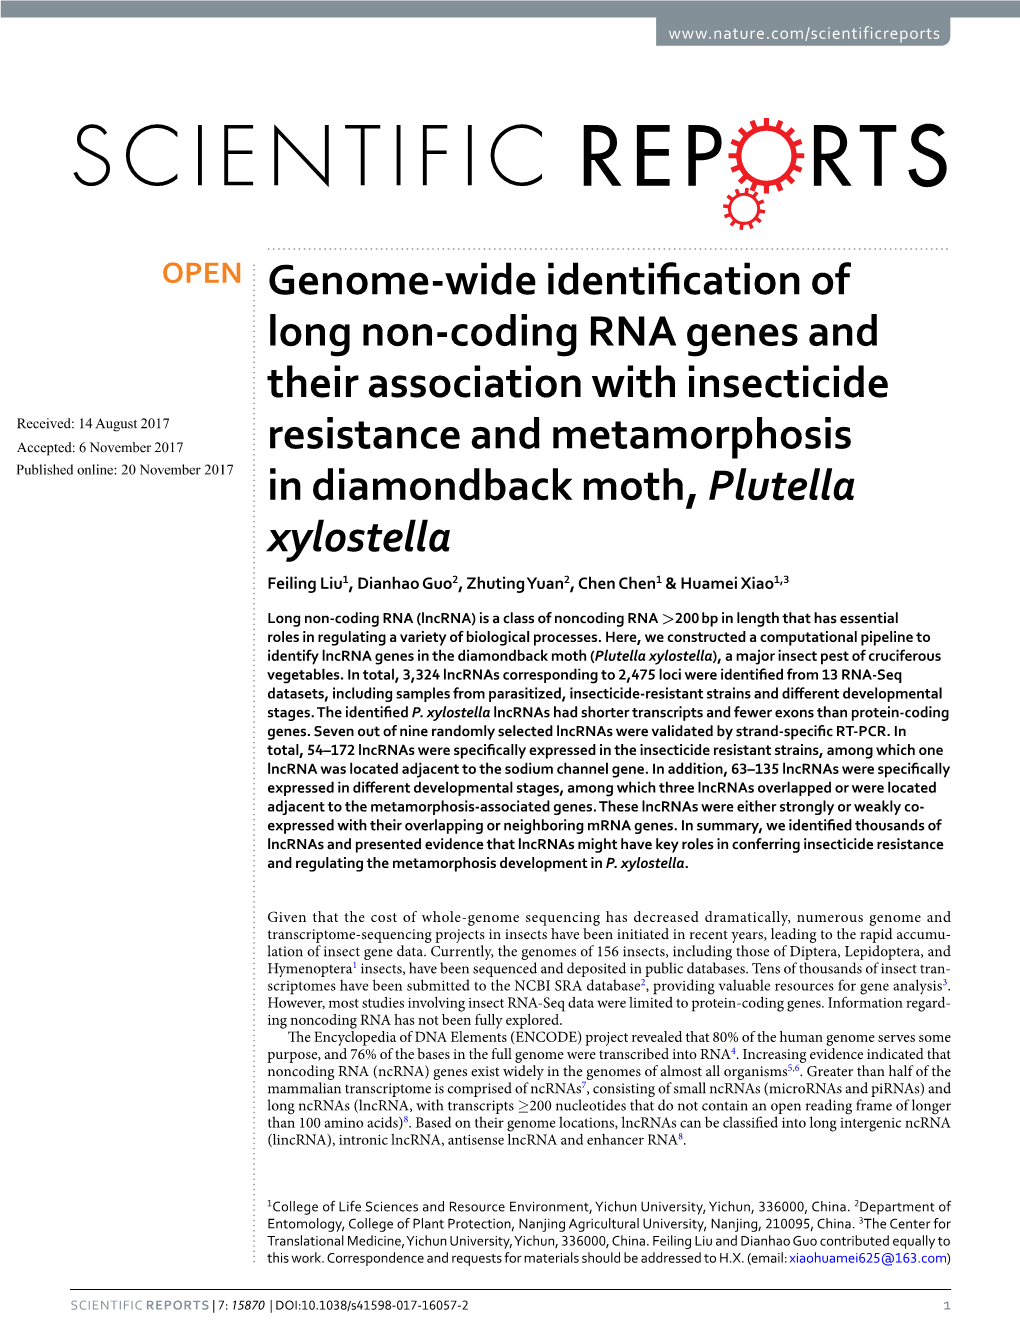 Genome-Wide Identification of Long Non-Coding RNA Genes and Their